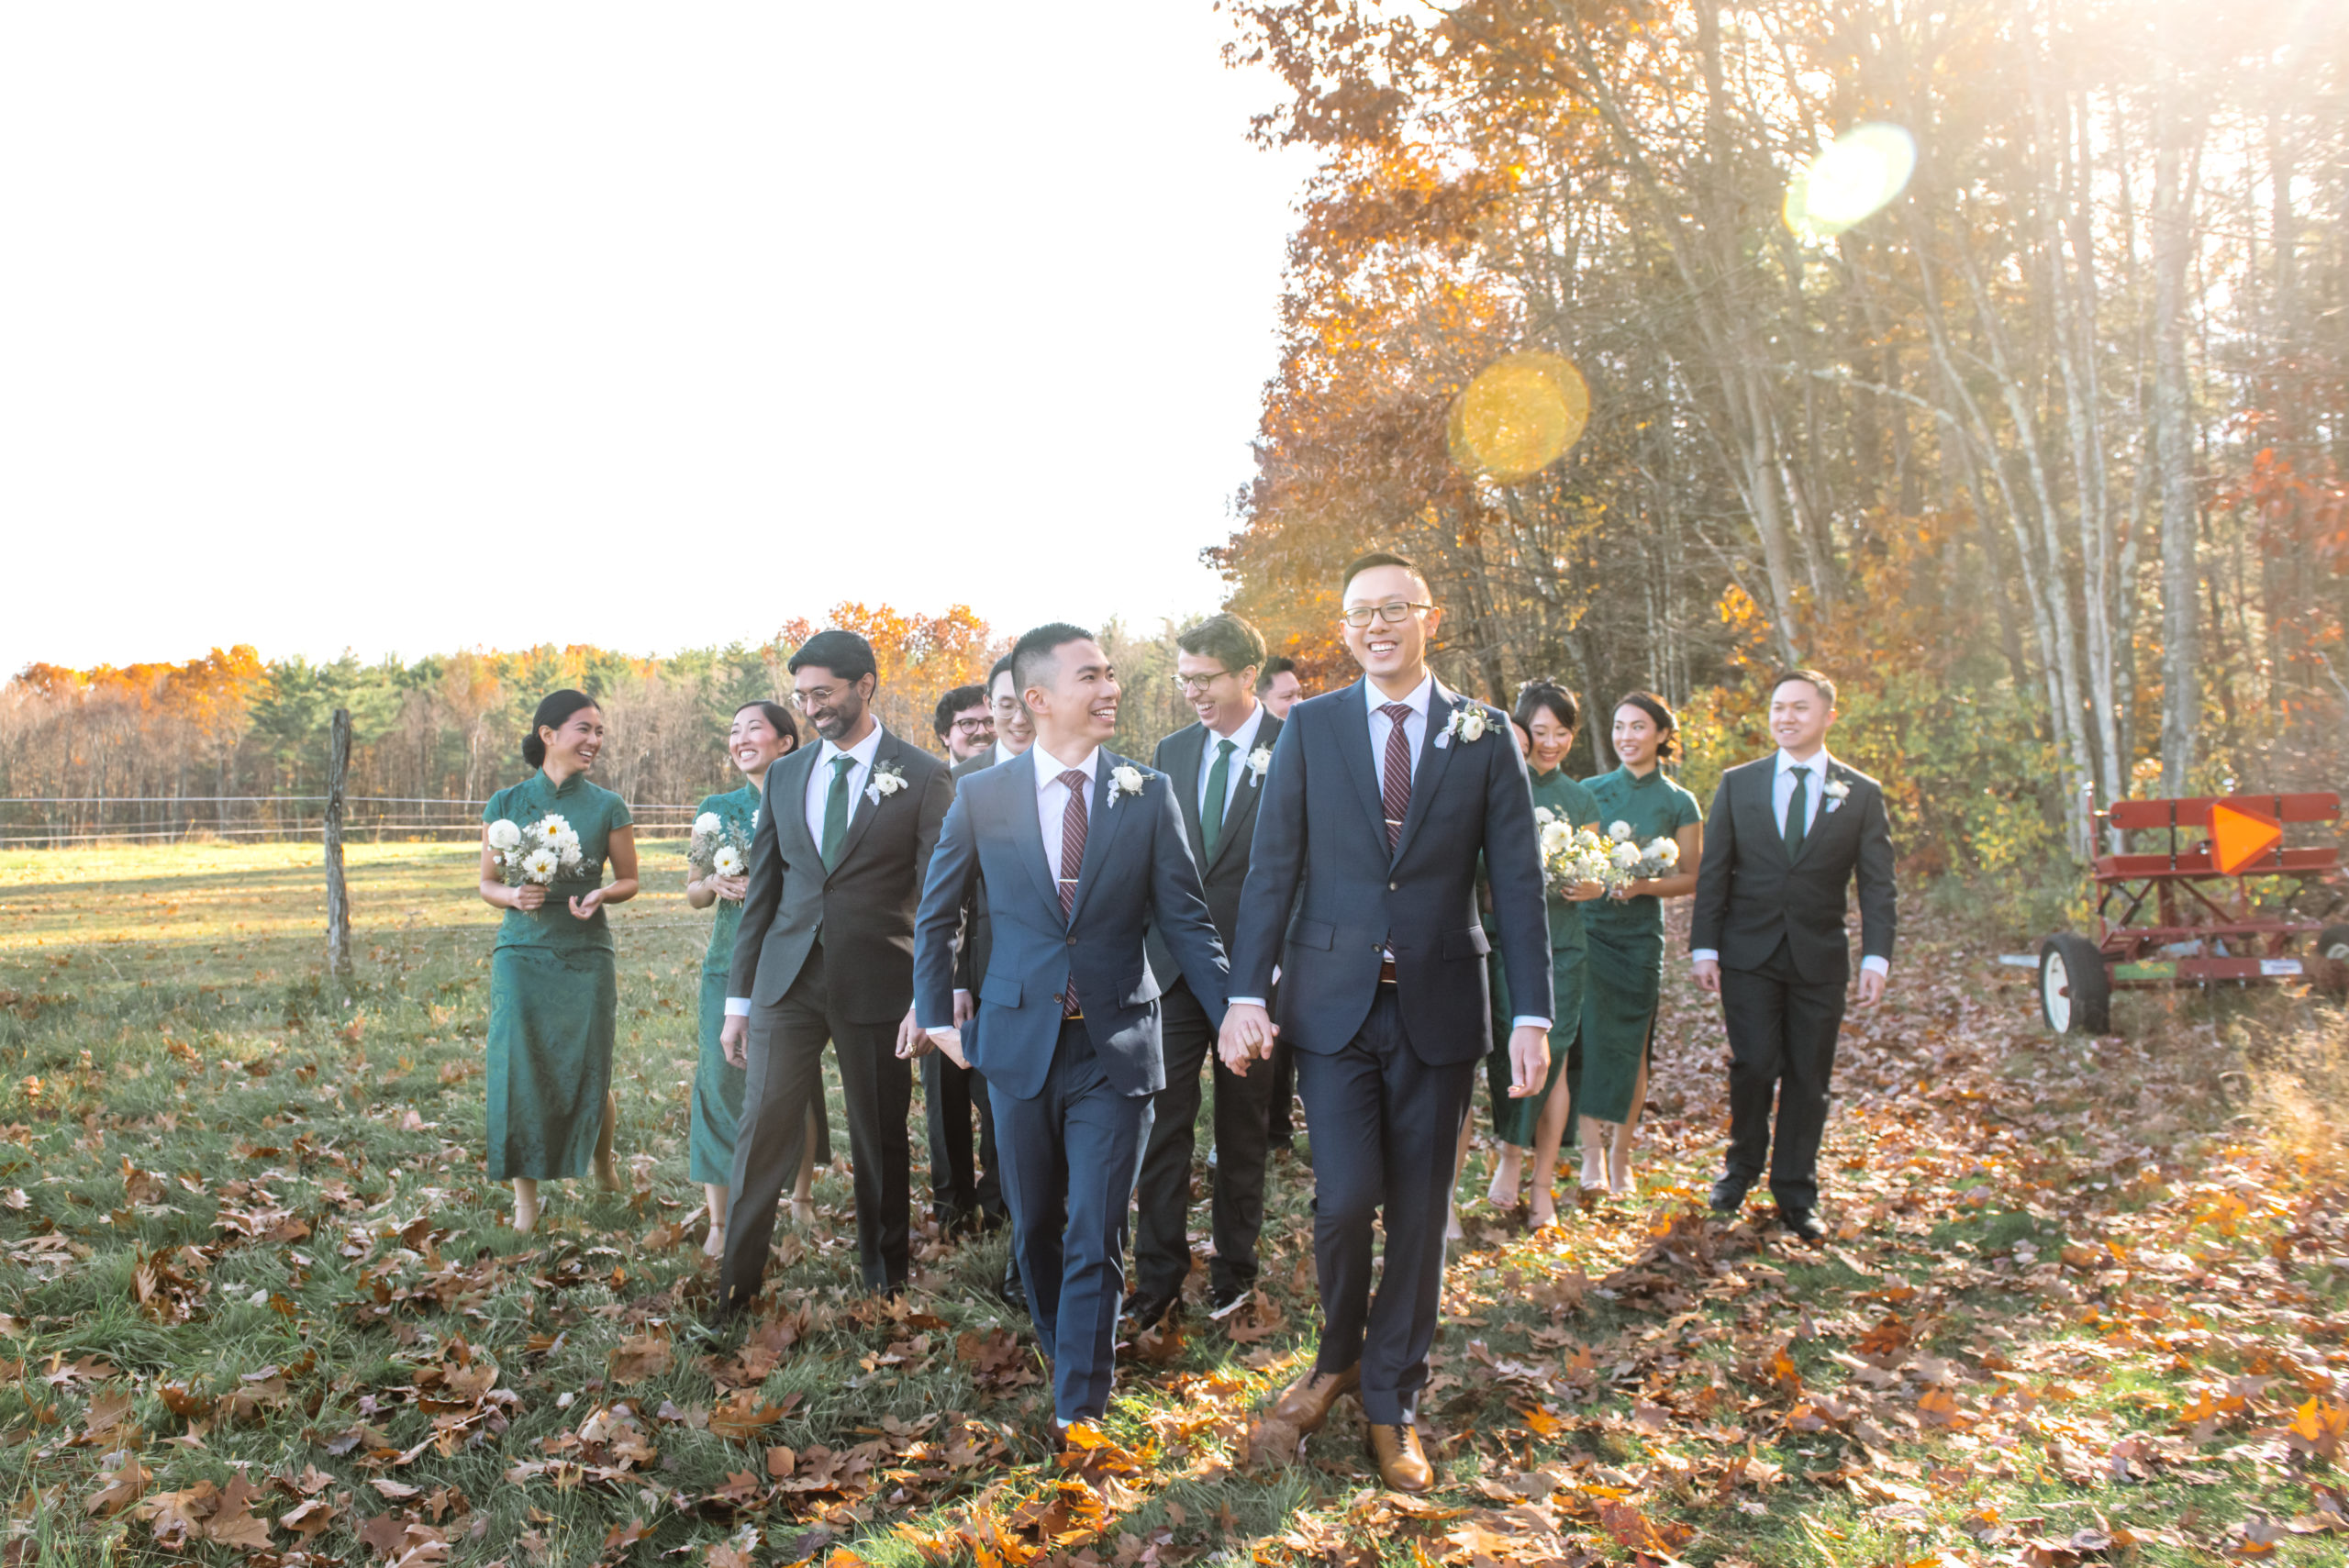 Full body portrait of two grooms walking hand in hand, one looking directly to camera and the other looking up to his partner. Their wedding party is following them behind and everyone is smiling. The women are dressed in dark green qi paos and are holding white bouquets. The men are dressed in black suits with matching dark green ties and white boutonnieres. Autumnal trees are in the background with the sun shining through them.